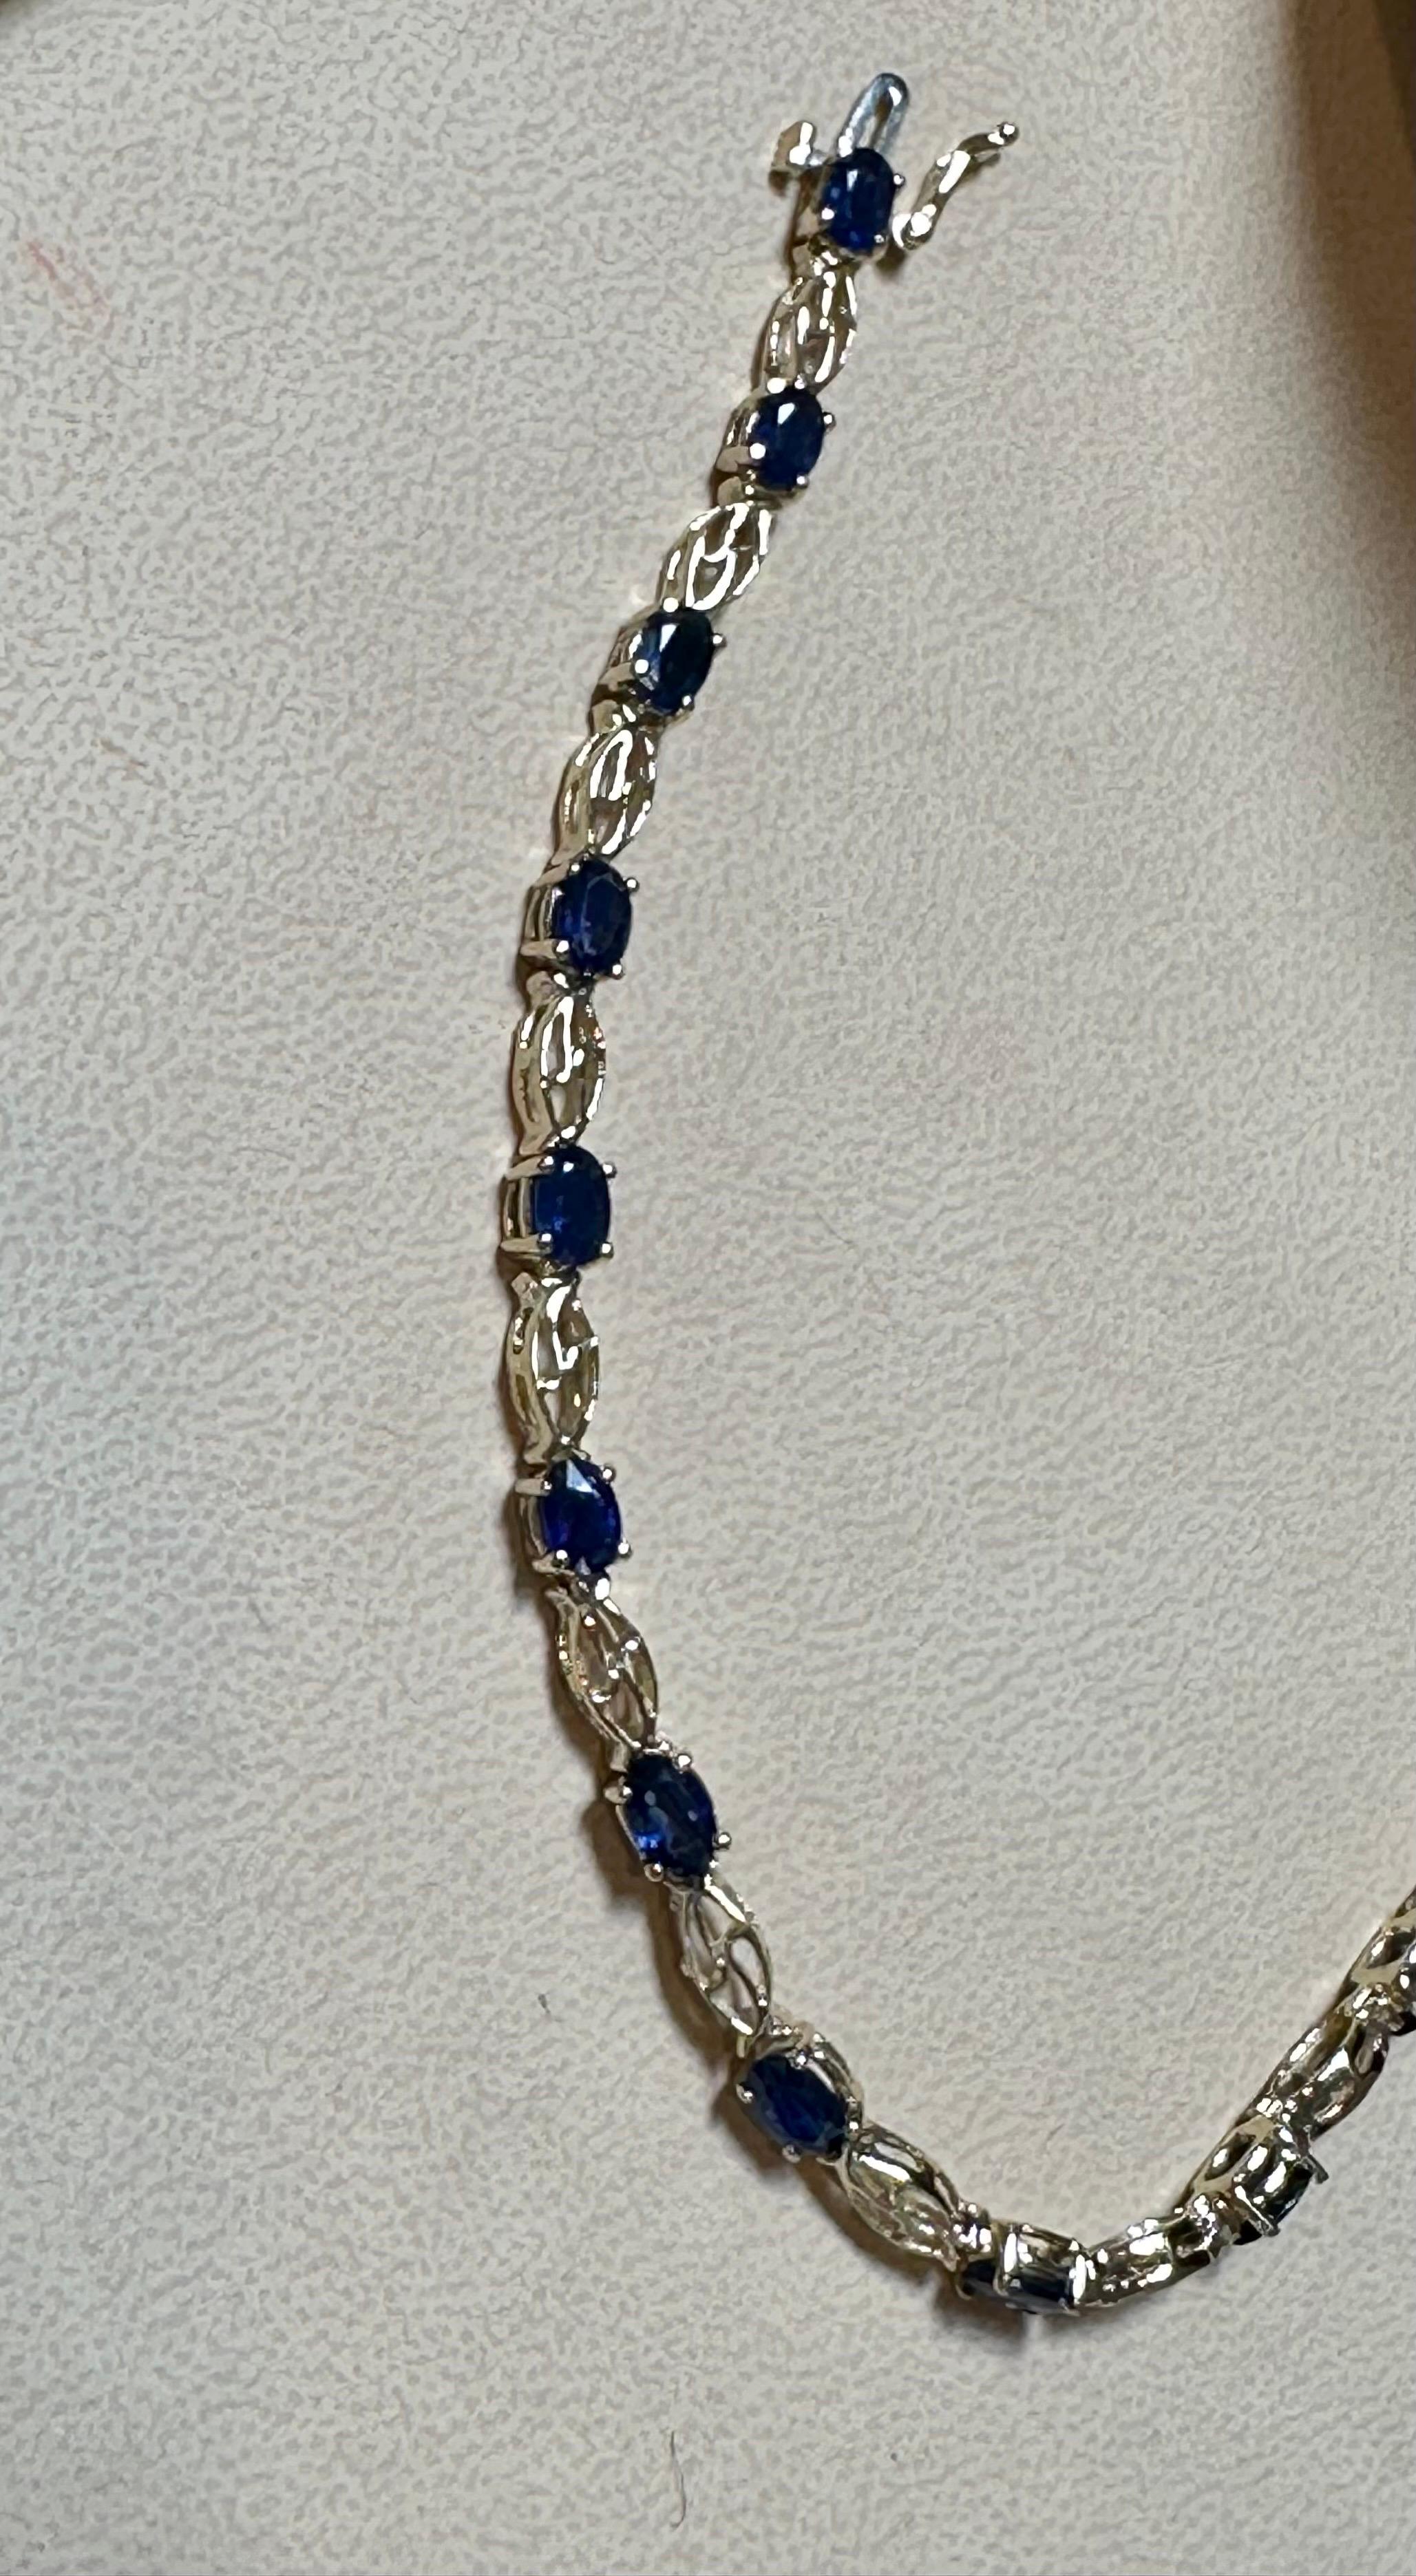 8Ct Natural Oval Blue Sapphire Tennis Bracelet 14 Karat Yellow Gold, 7 Inch Long In New Condition For Sale In New York, NY